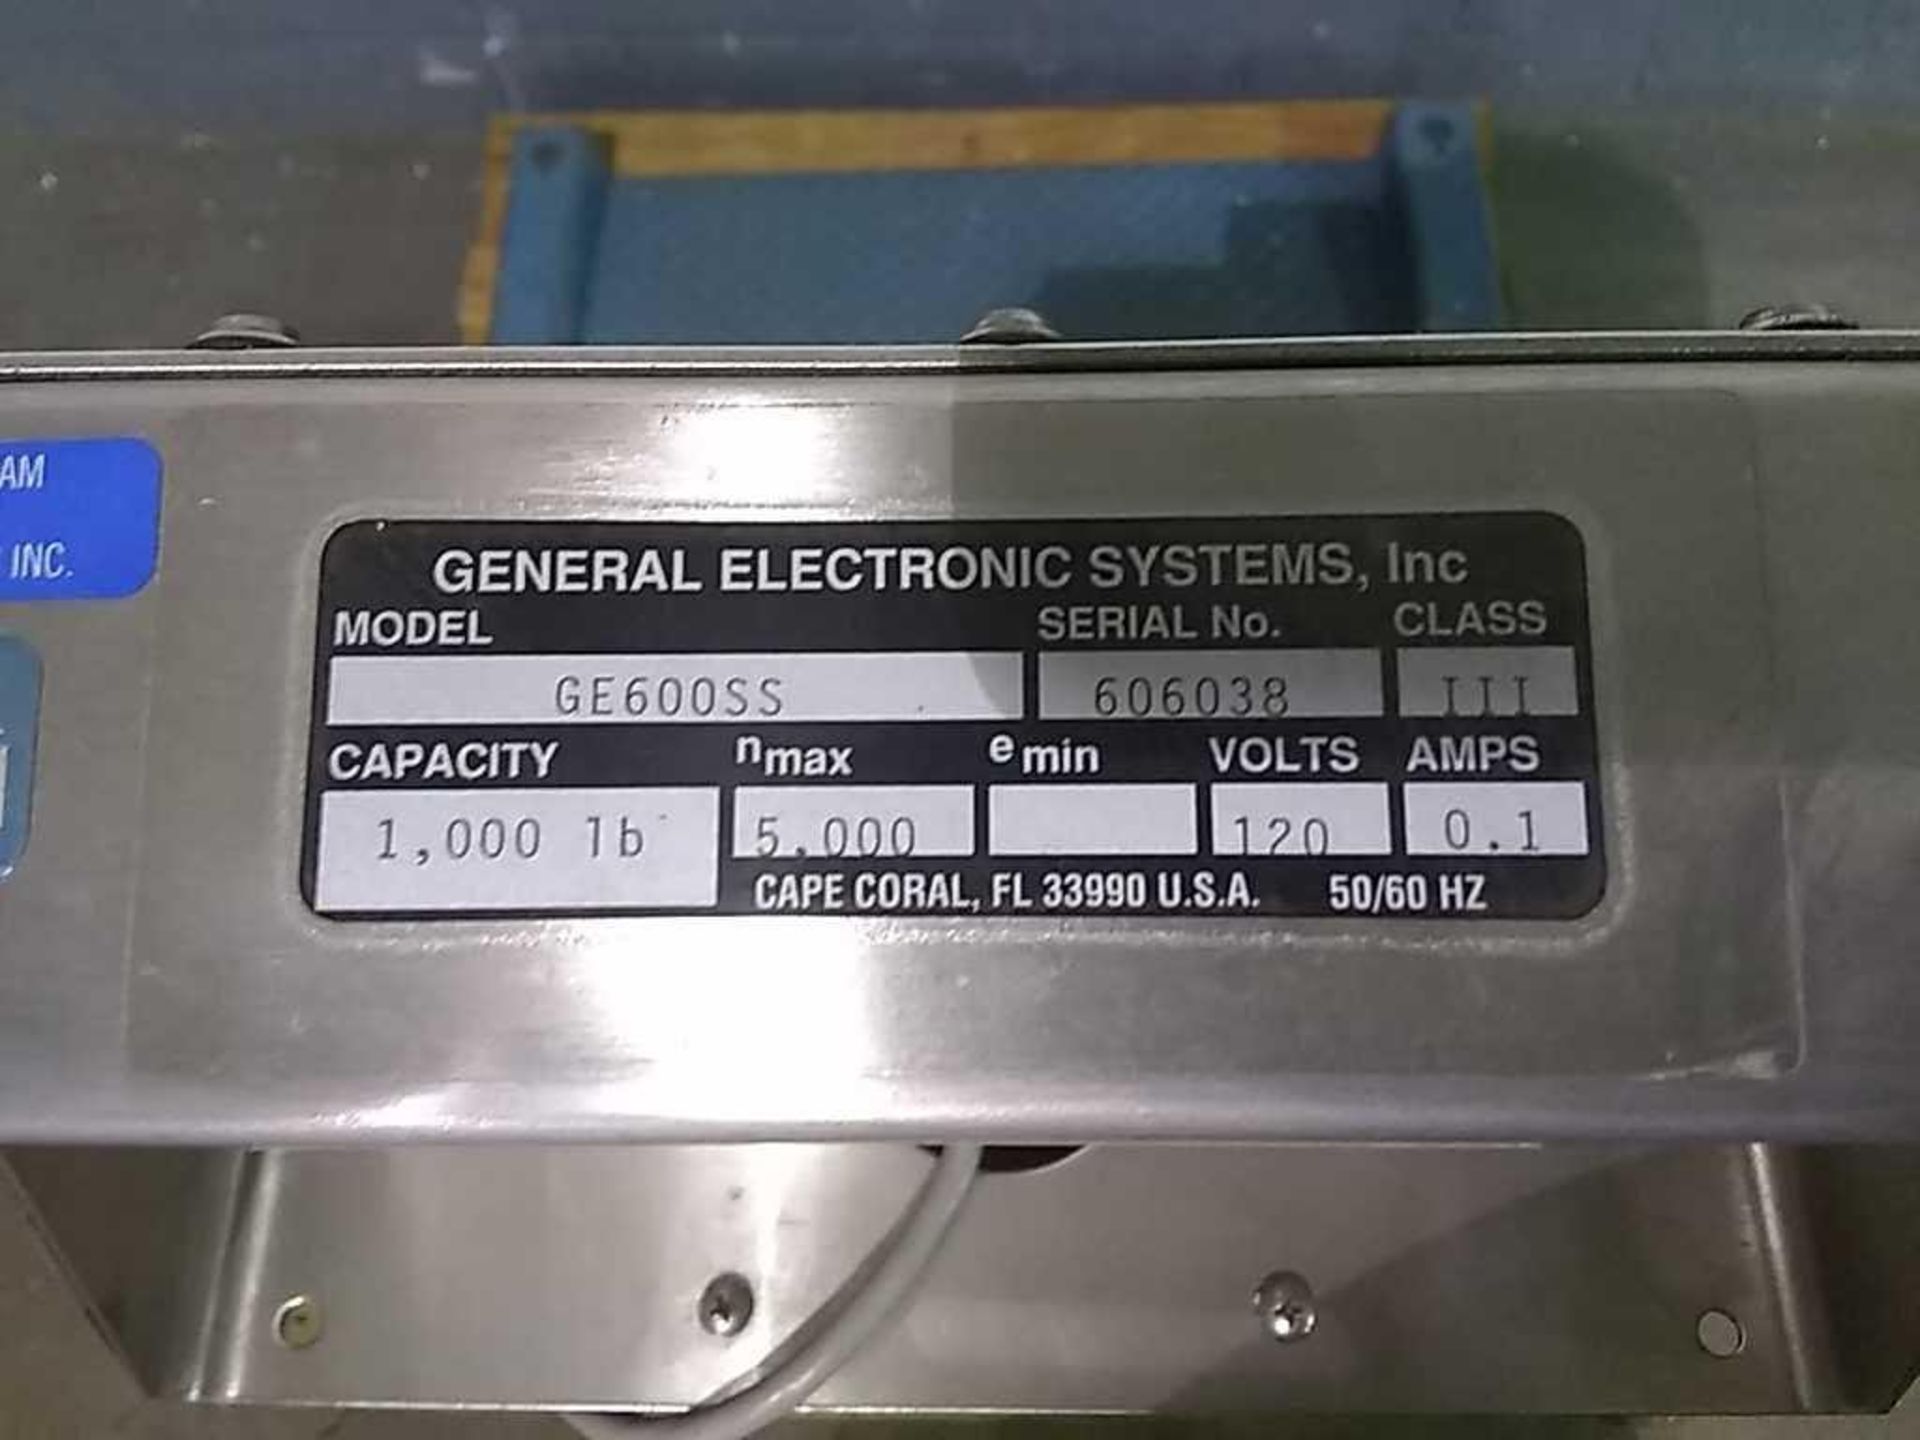 General Electronics Systems Drum Pro Model GE600SS 1000lb Capacity 30x30"" Digital Read Out - Image 3 of 4